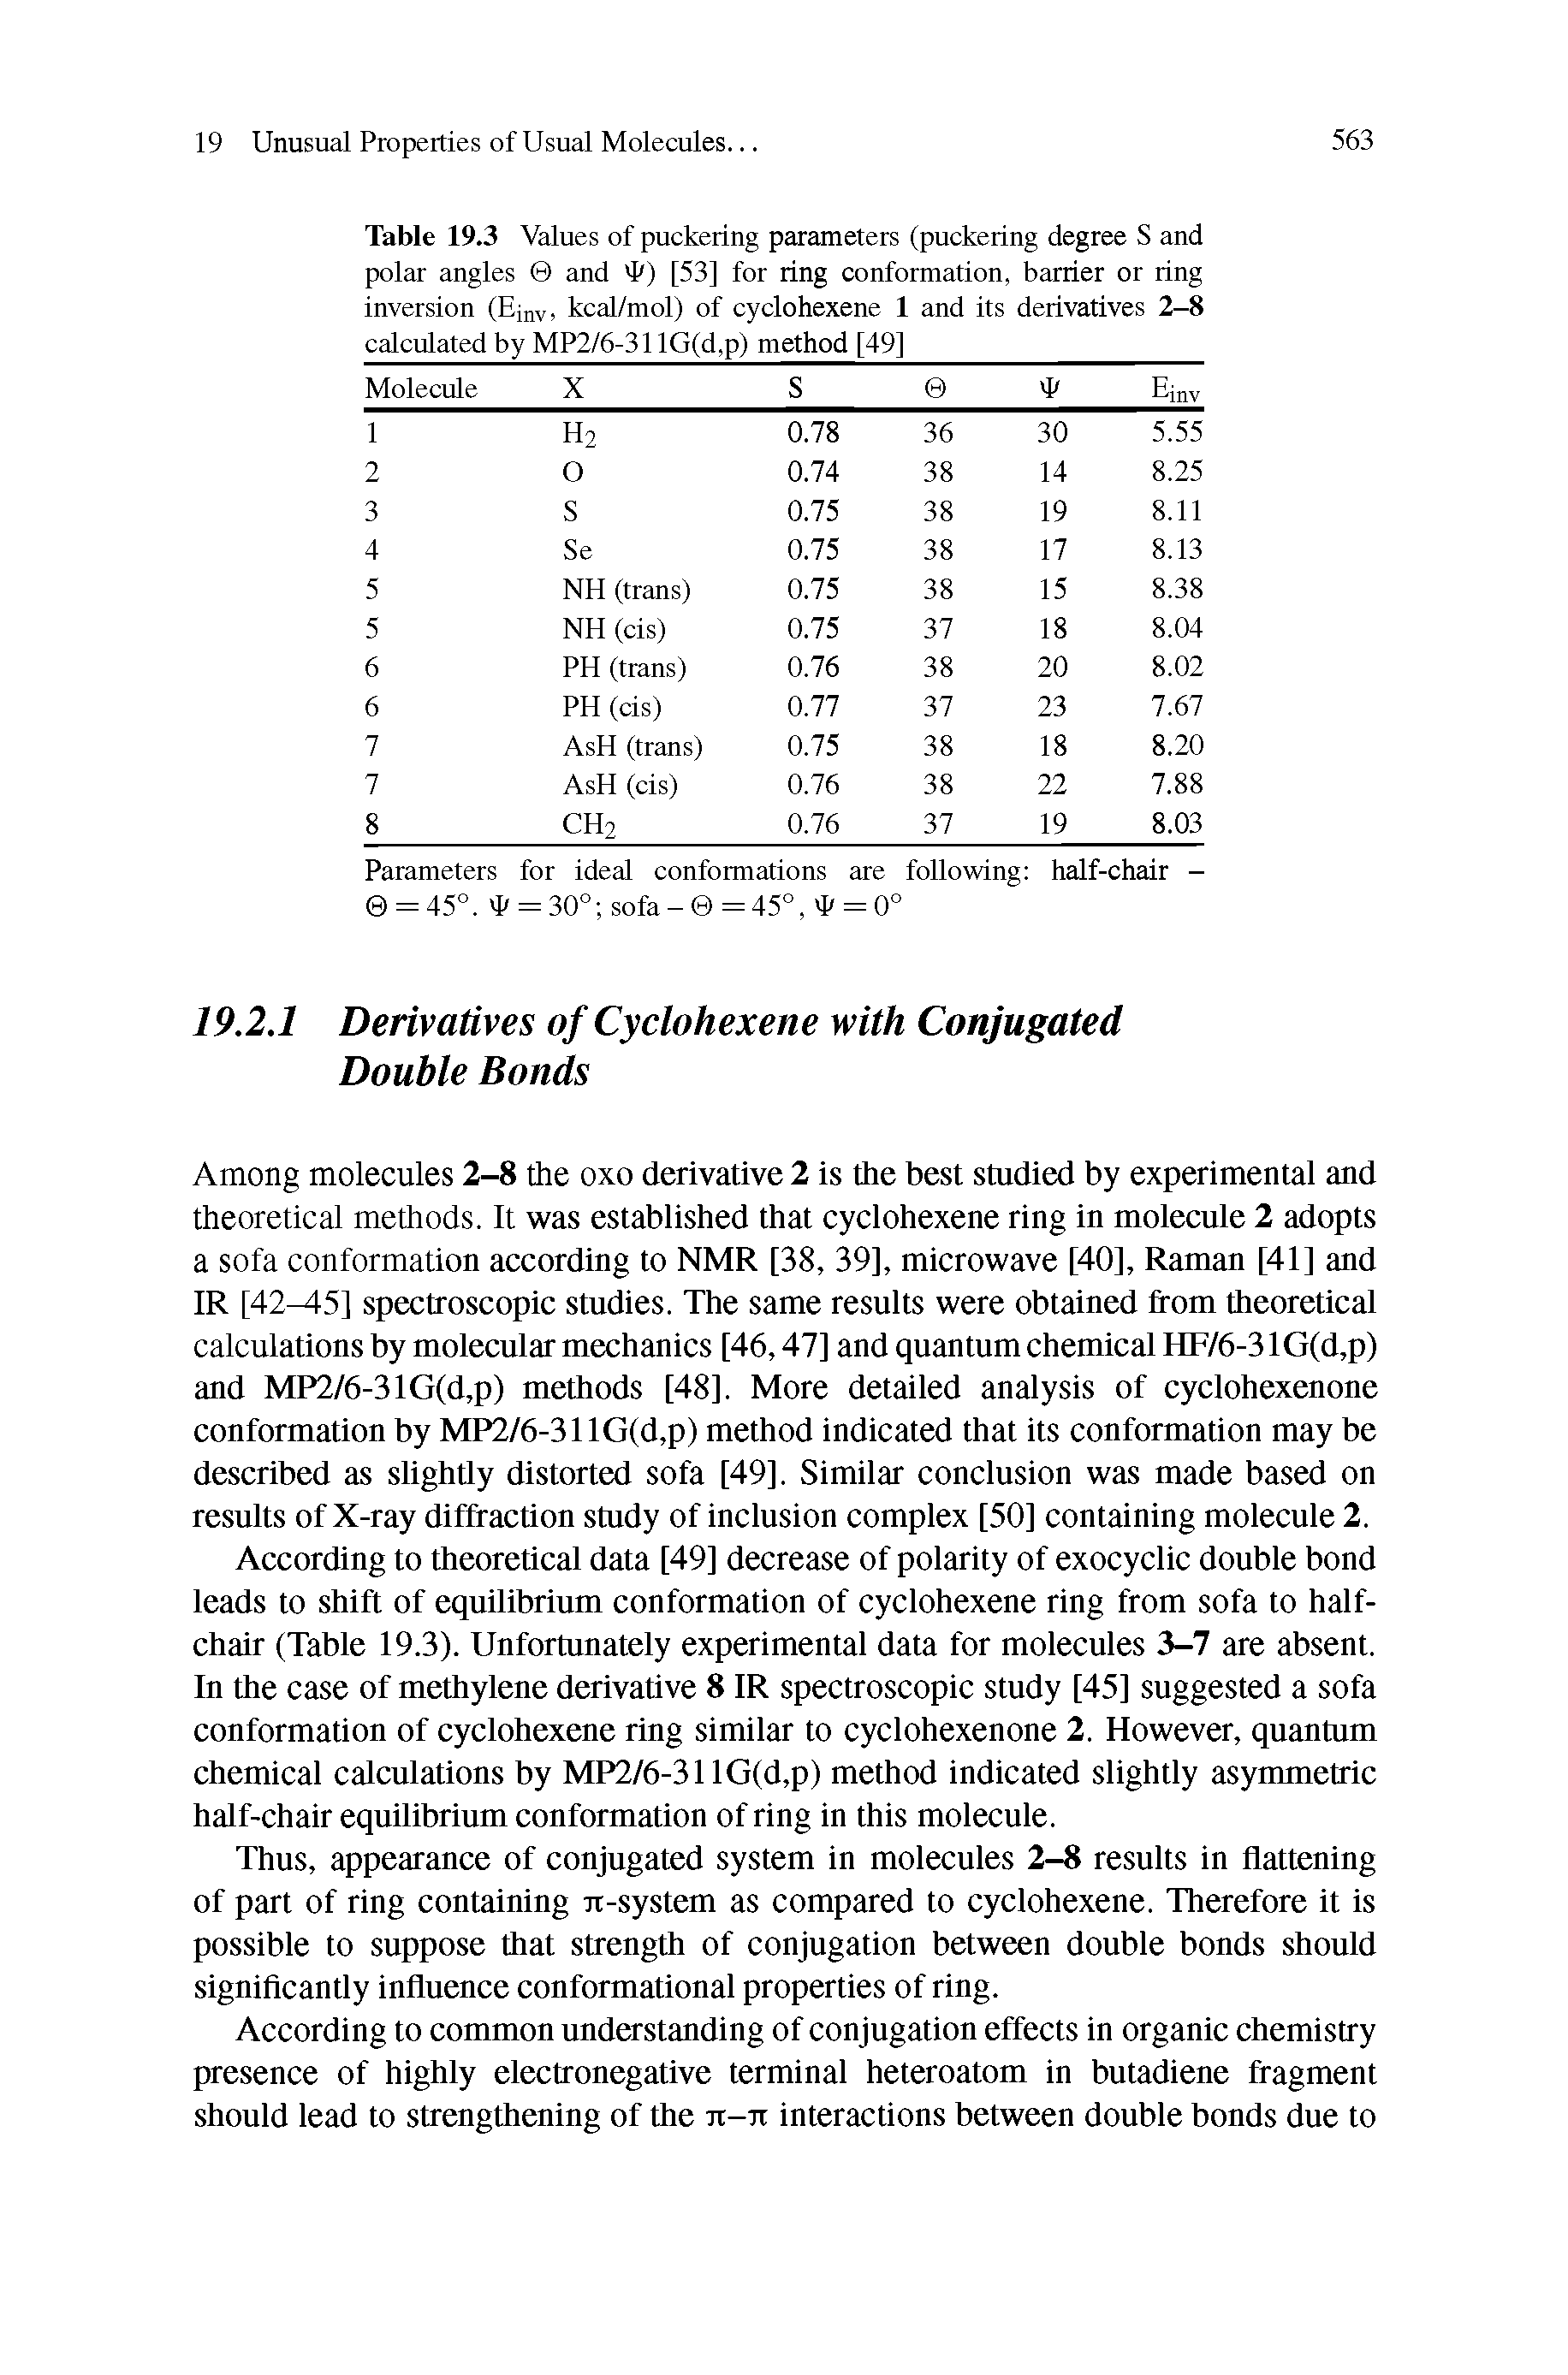 Table 19.3 Values of puckering parameters (puckering degree S and polar angles and ) [53] for ring conformation, barrier or ring inversion (Ejnv, kcal/mol) of cyclohexene 1 and its derivatives 2-8 calculated by MP2/6-311G(d,p) method [49]...